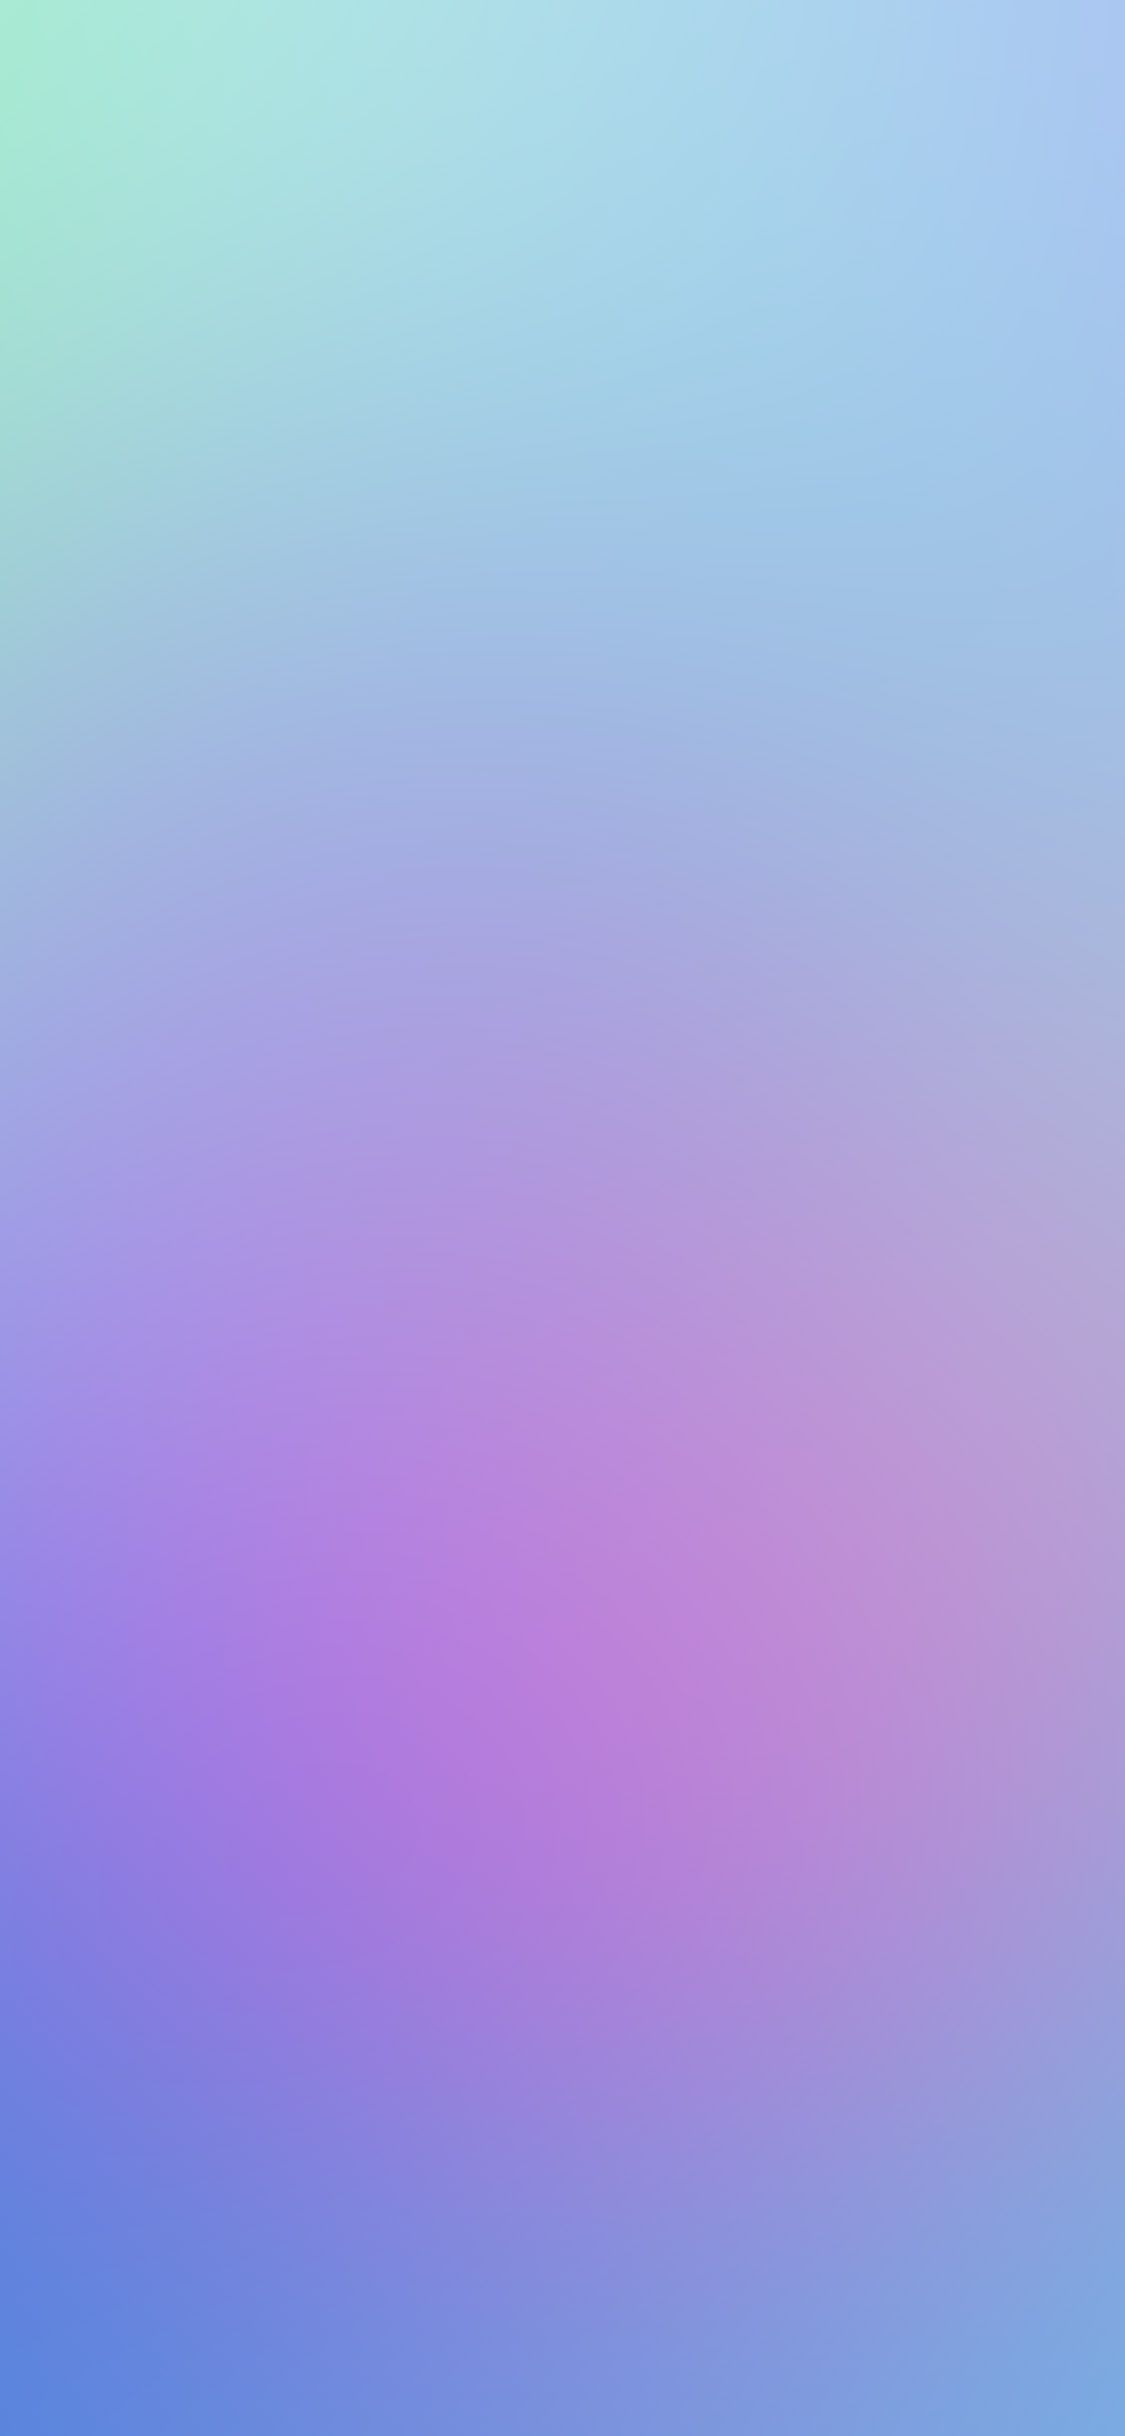 A pink and blue gradient - Blurry